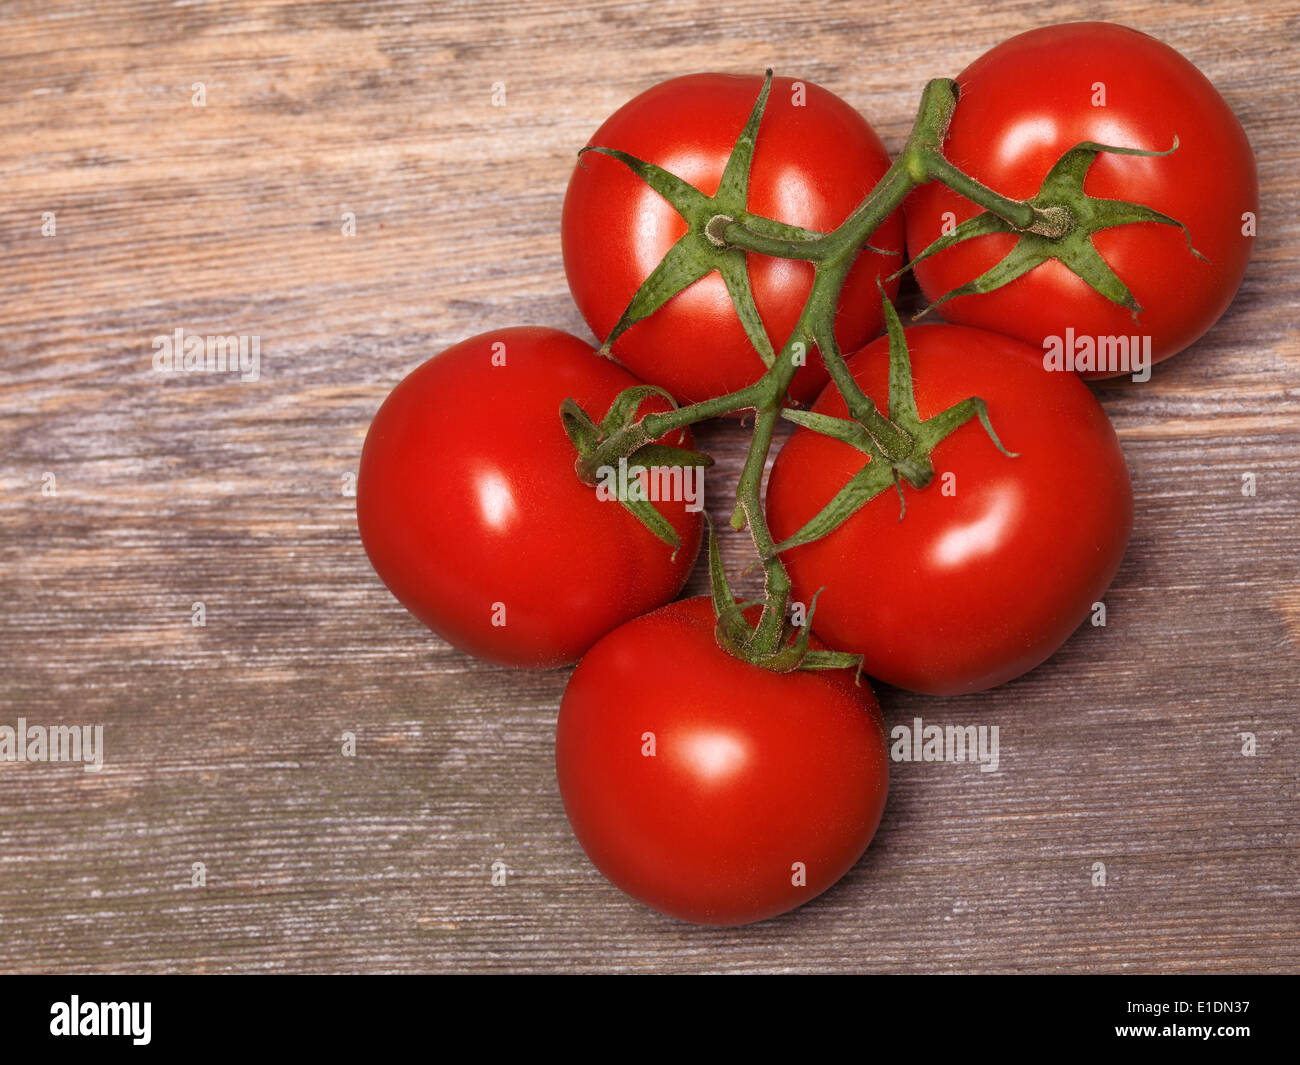 Tomatoes on the vine on rustic wooden table background Stock Photo